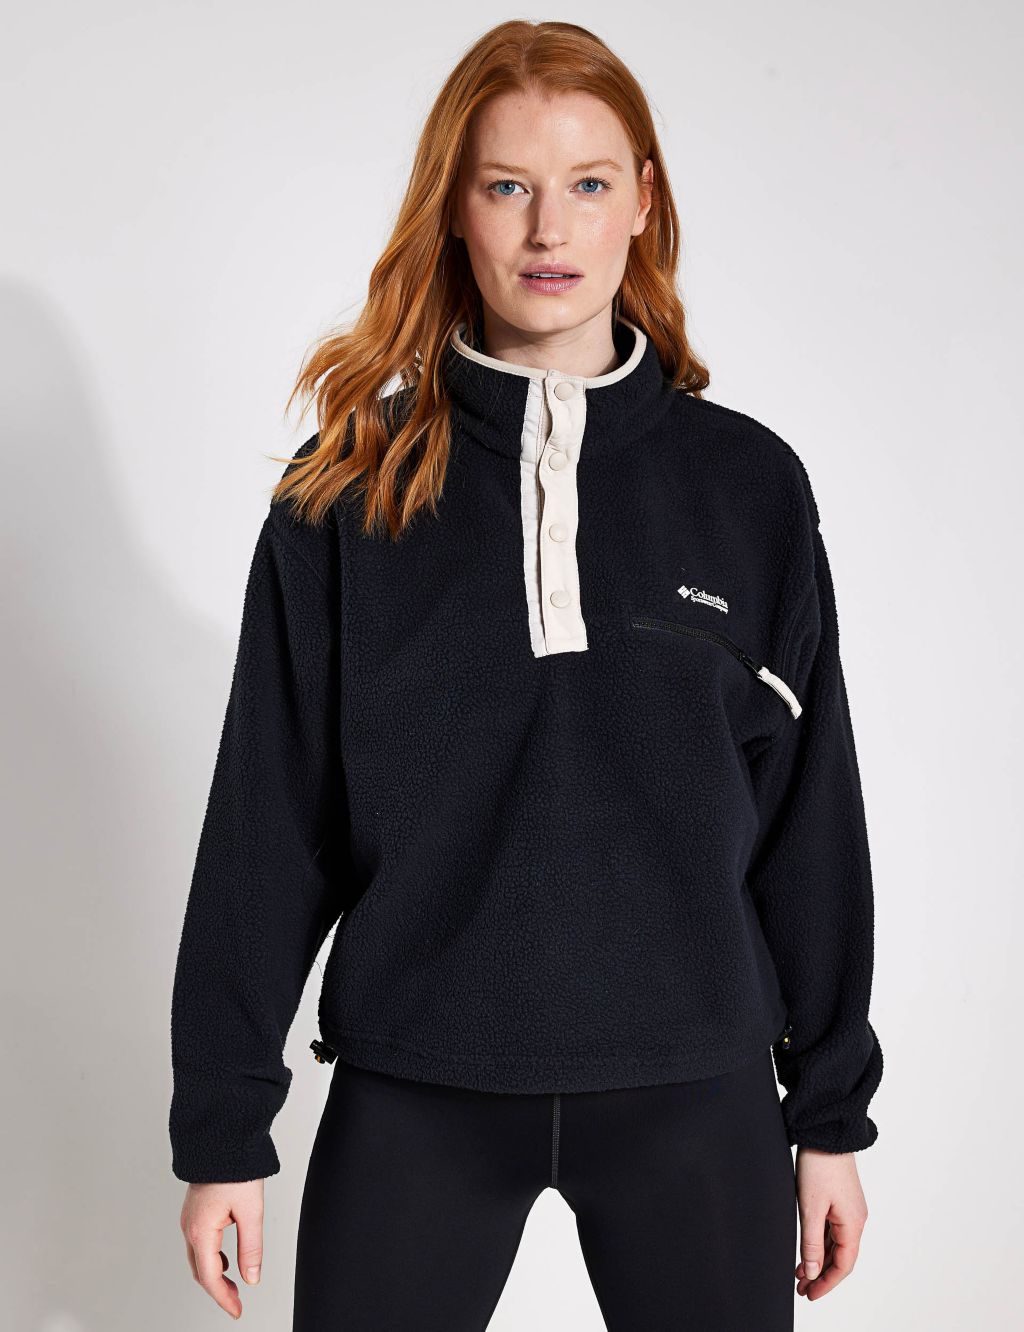 Helvetia Funnel Neck Cropped Jacket image 1